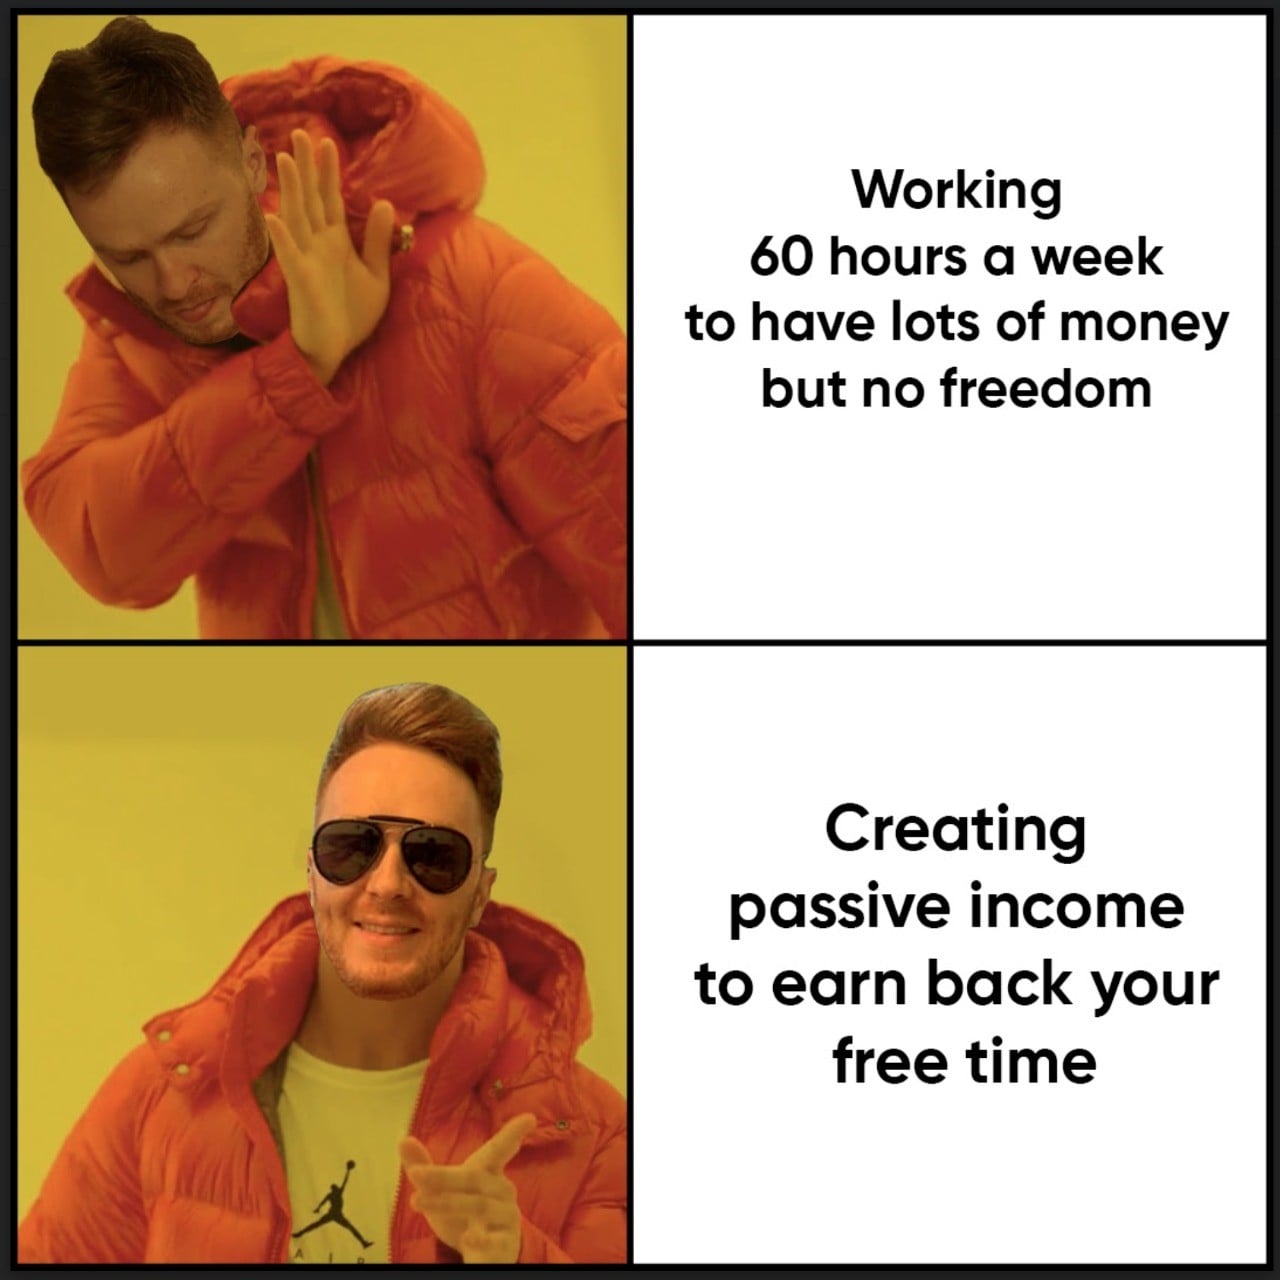 Image of the Drake meme, with Dr. James on the left with text comparing "Working 60 hours per week to have a lot of income but no freedom." and "Having a passive income to earn back your free time."